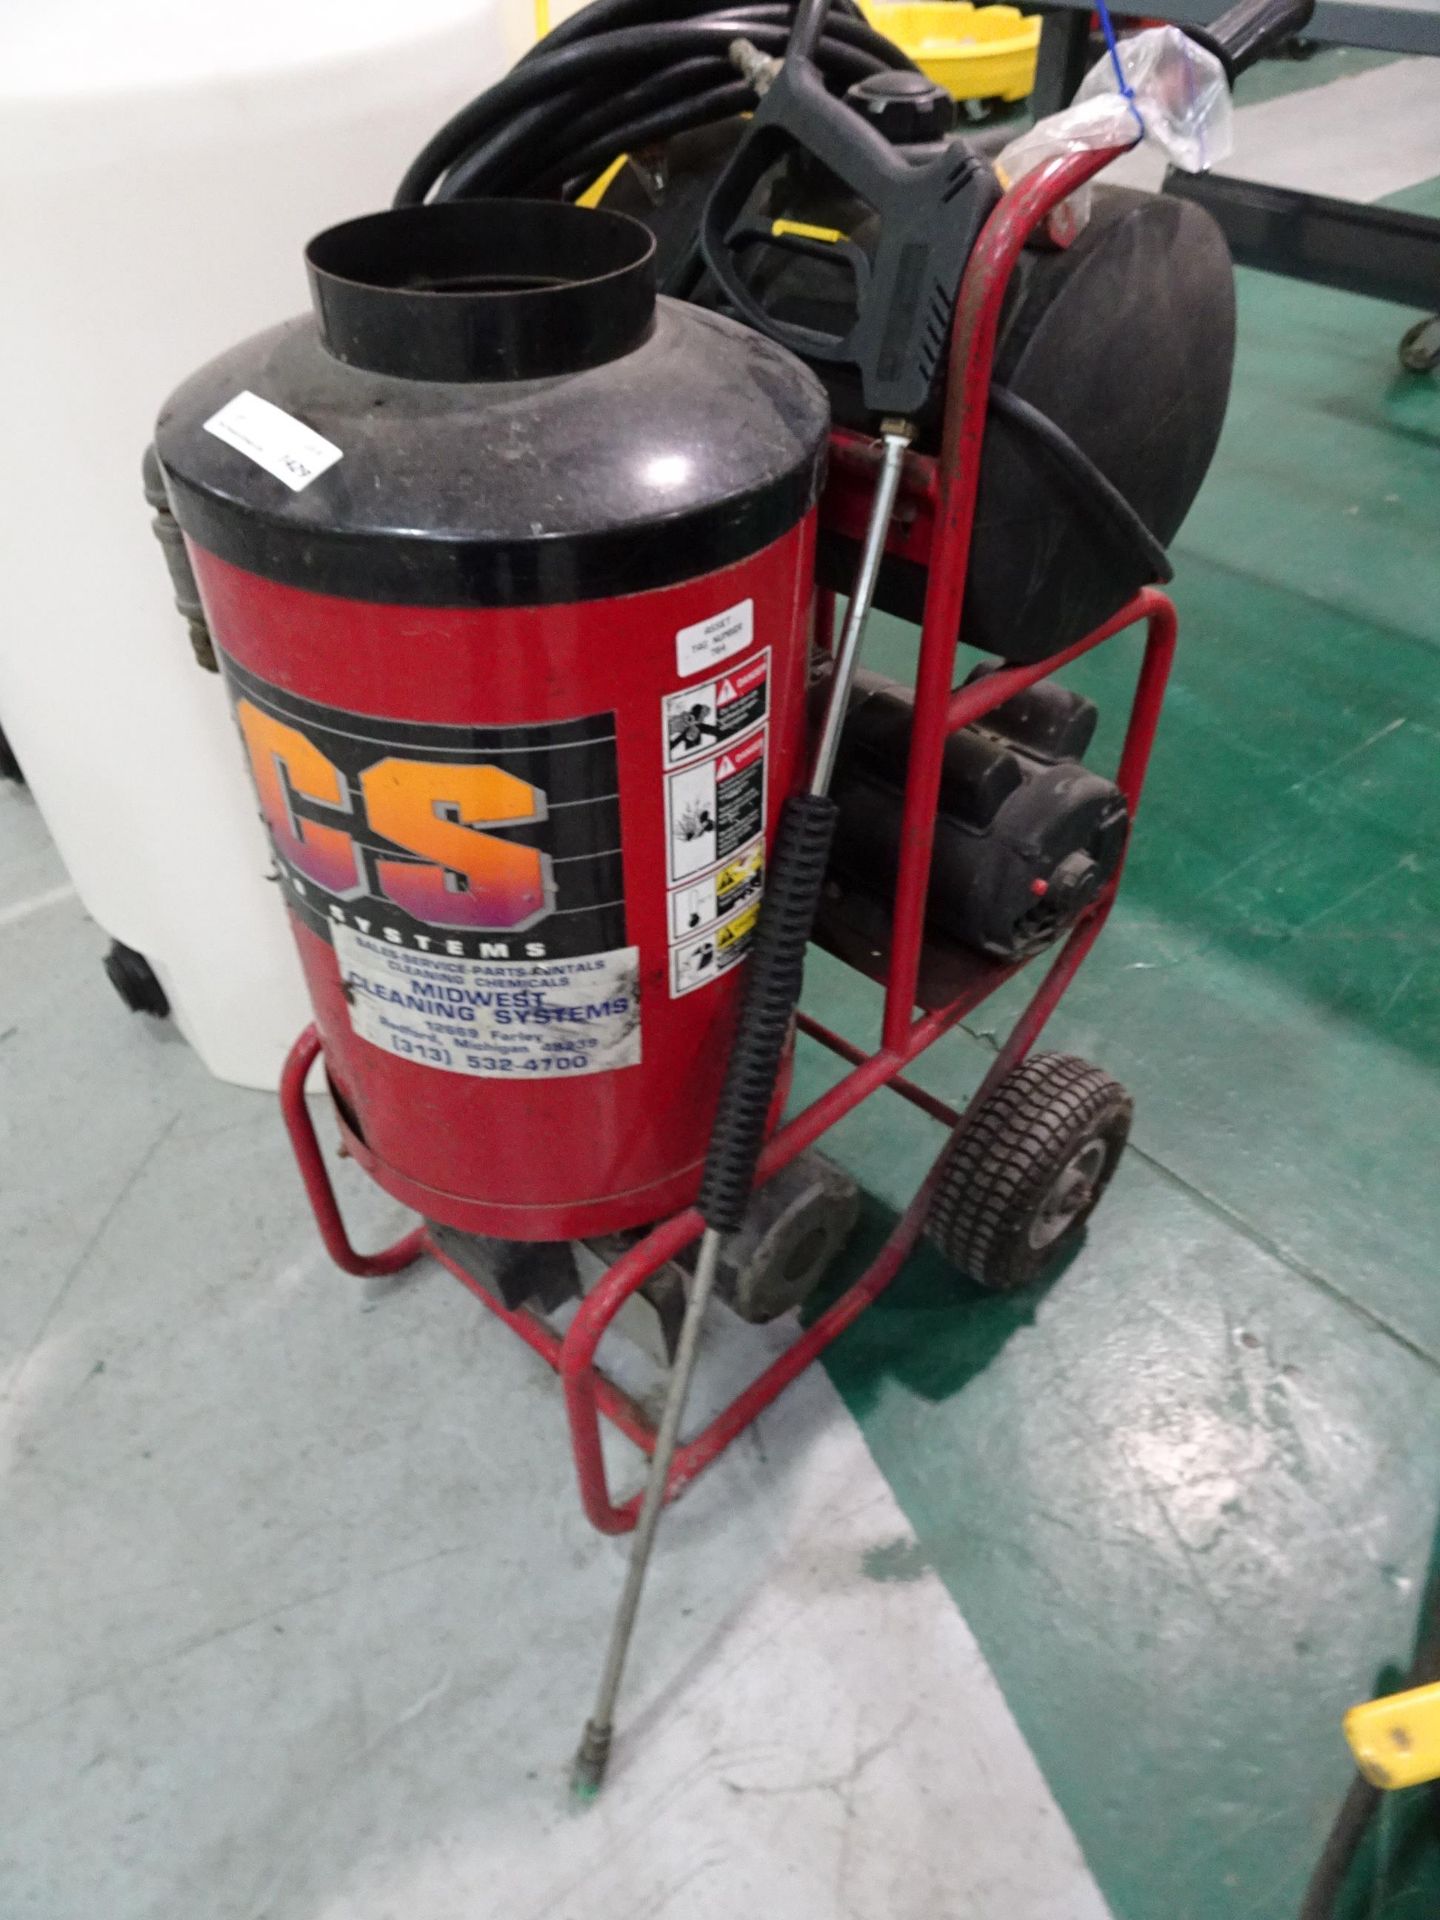 (1) AaLadin Cleaning Systems Model 1222, Oil Heated Pressure Washer